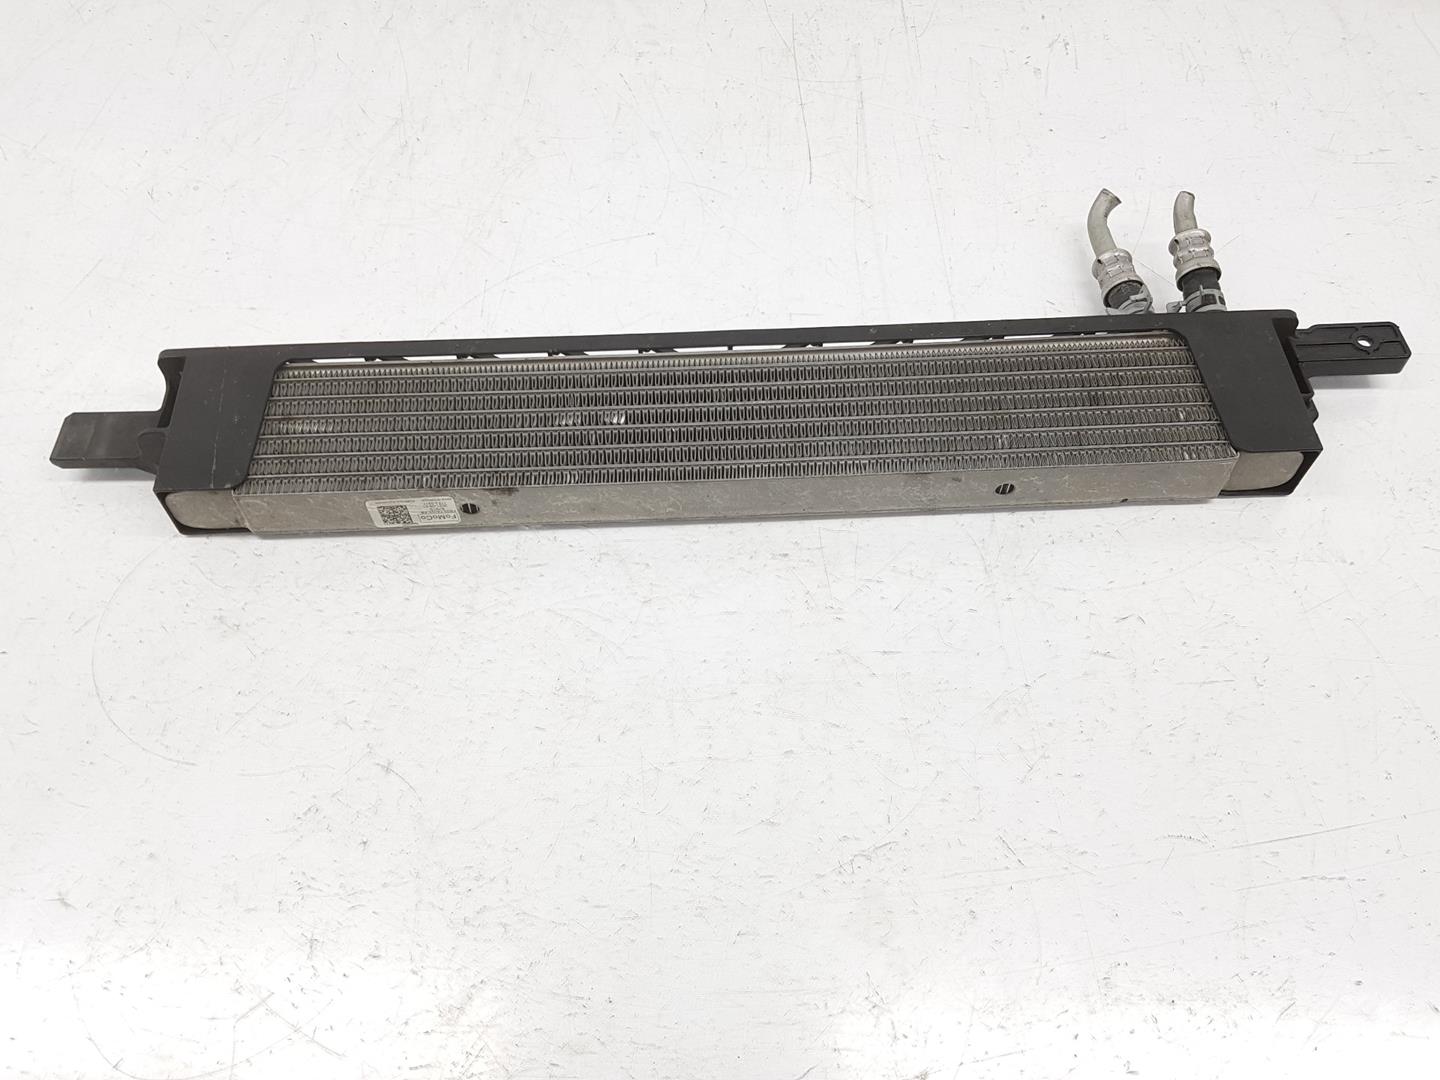 FORD USA Mustang 5 generation (2004-2014) Gearbox Radiator 2079921, FR337A095AB, 1141CB2222DL 24142518